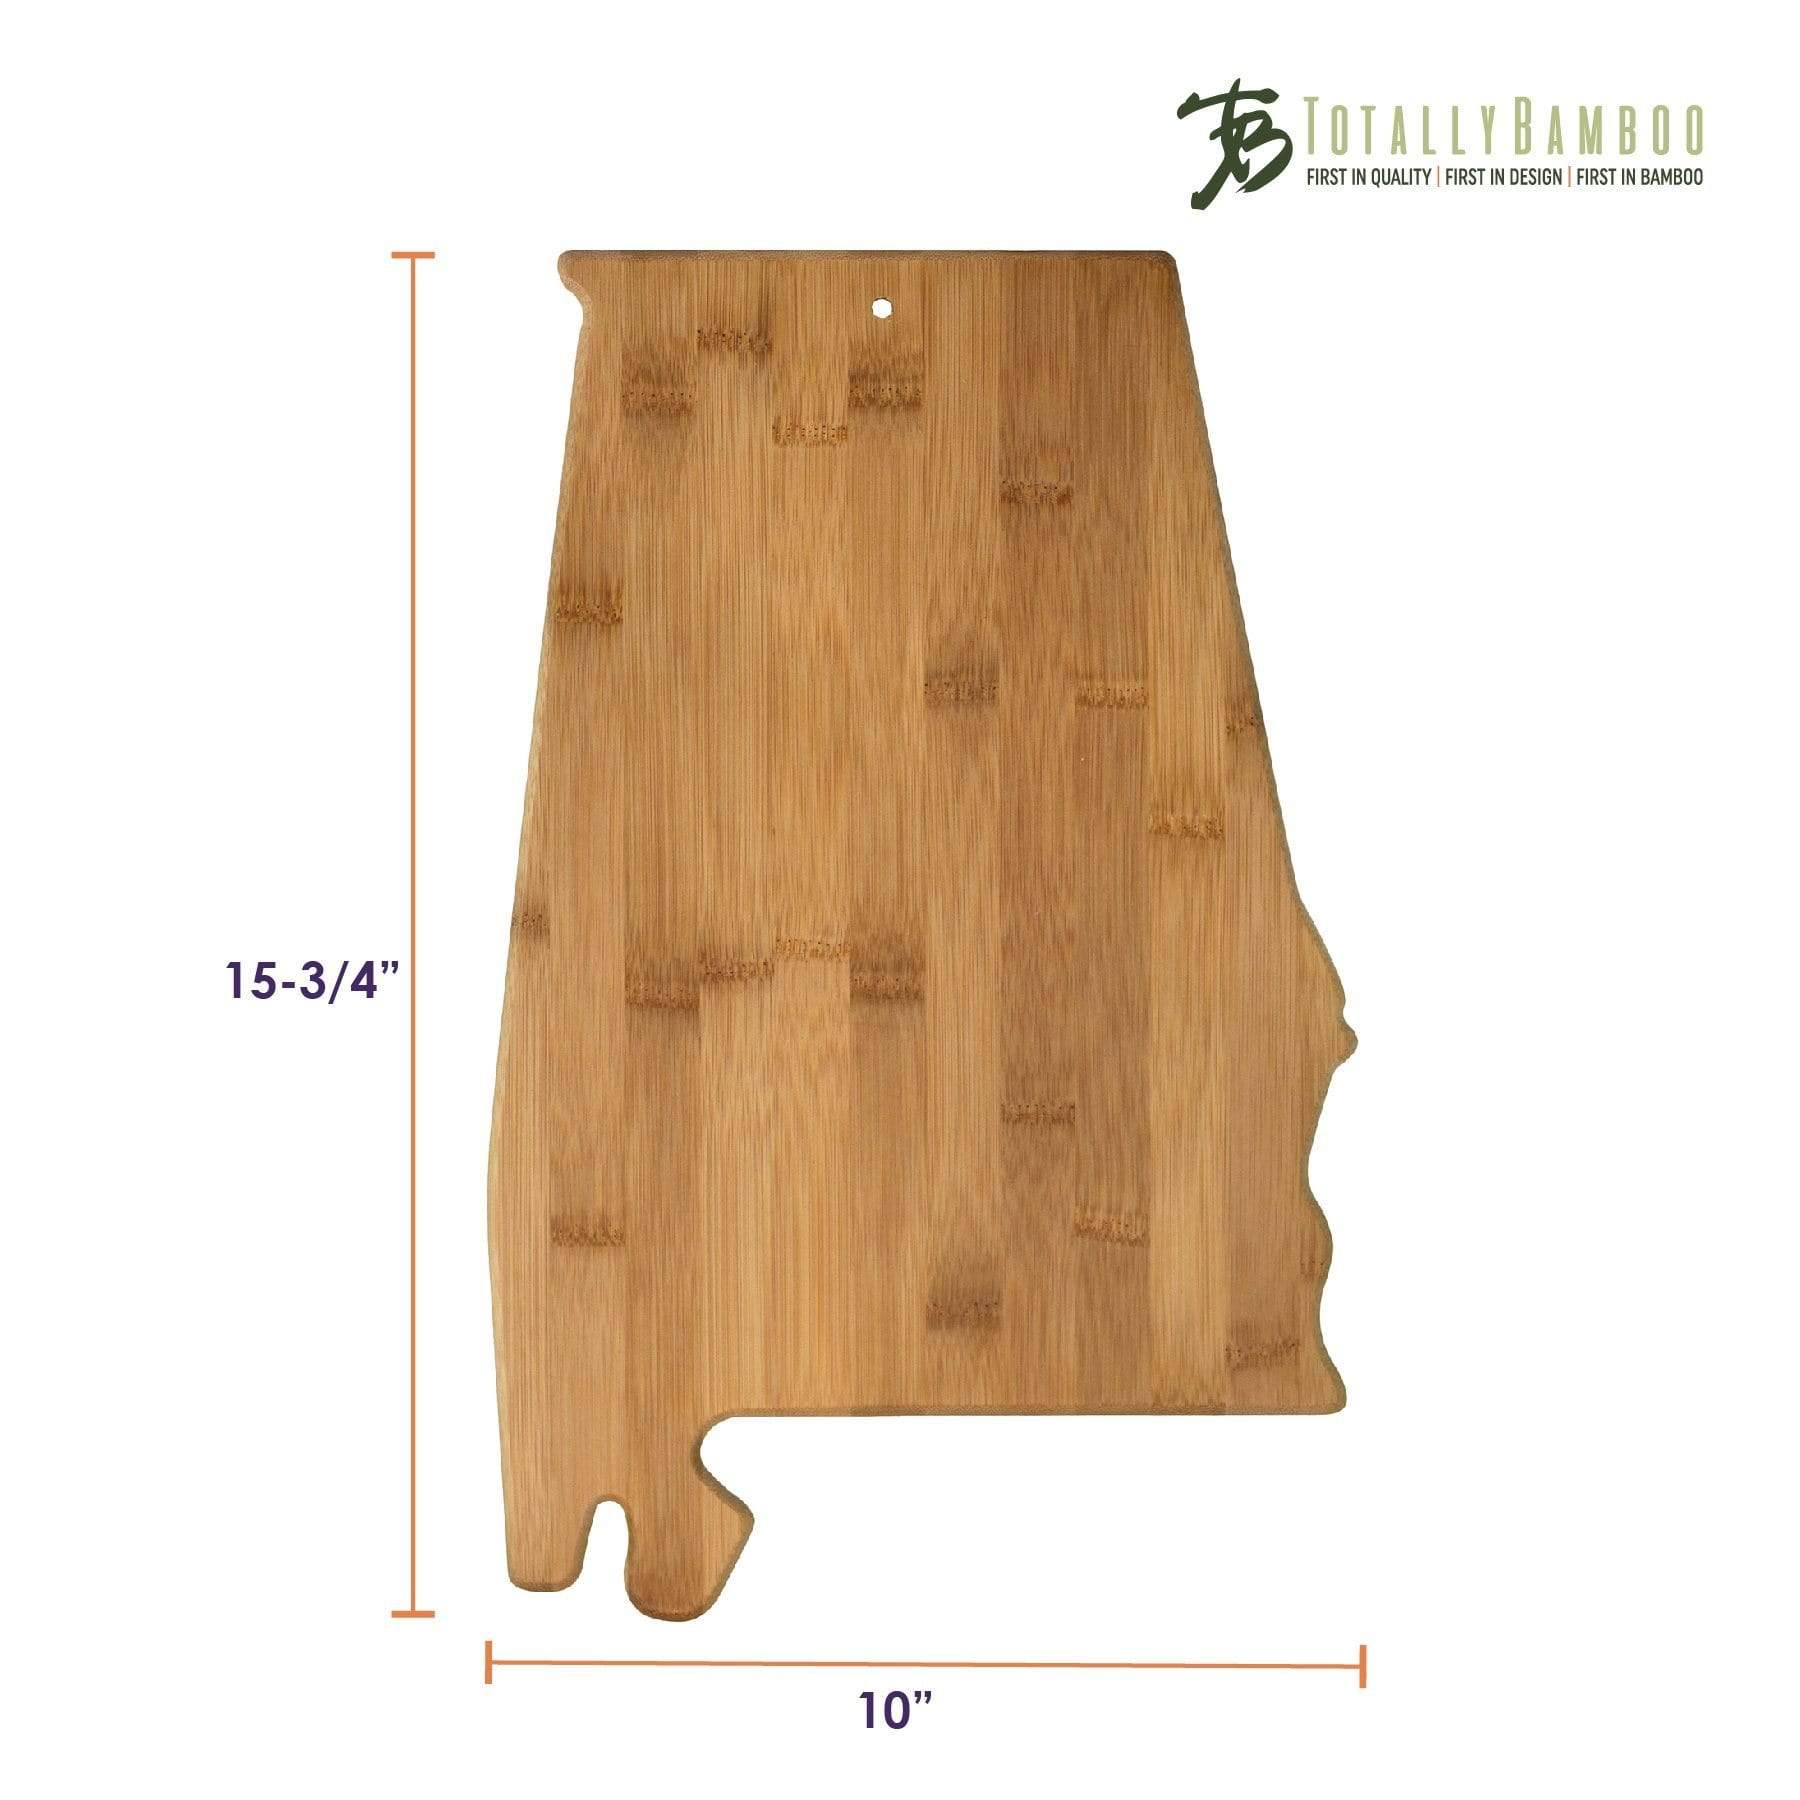 Totally Bamboo Alabama State Shaped Bamboo Serving and Cutting Board